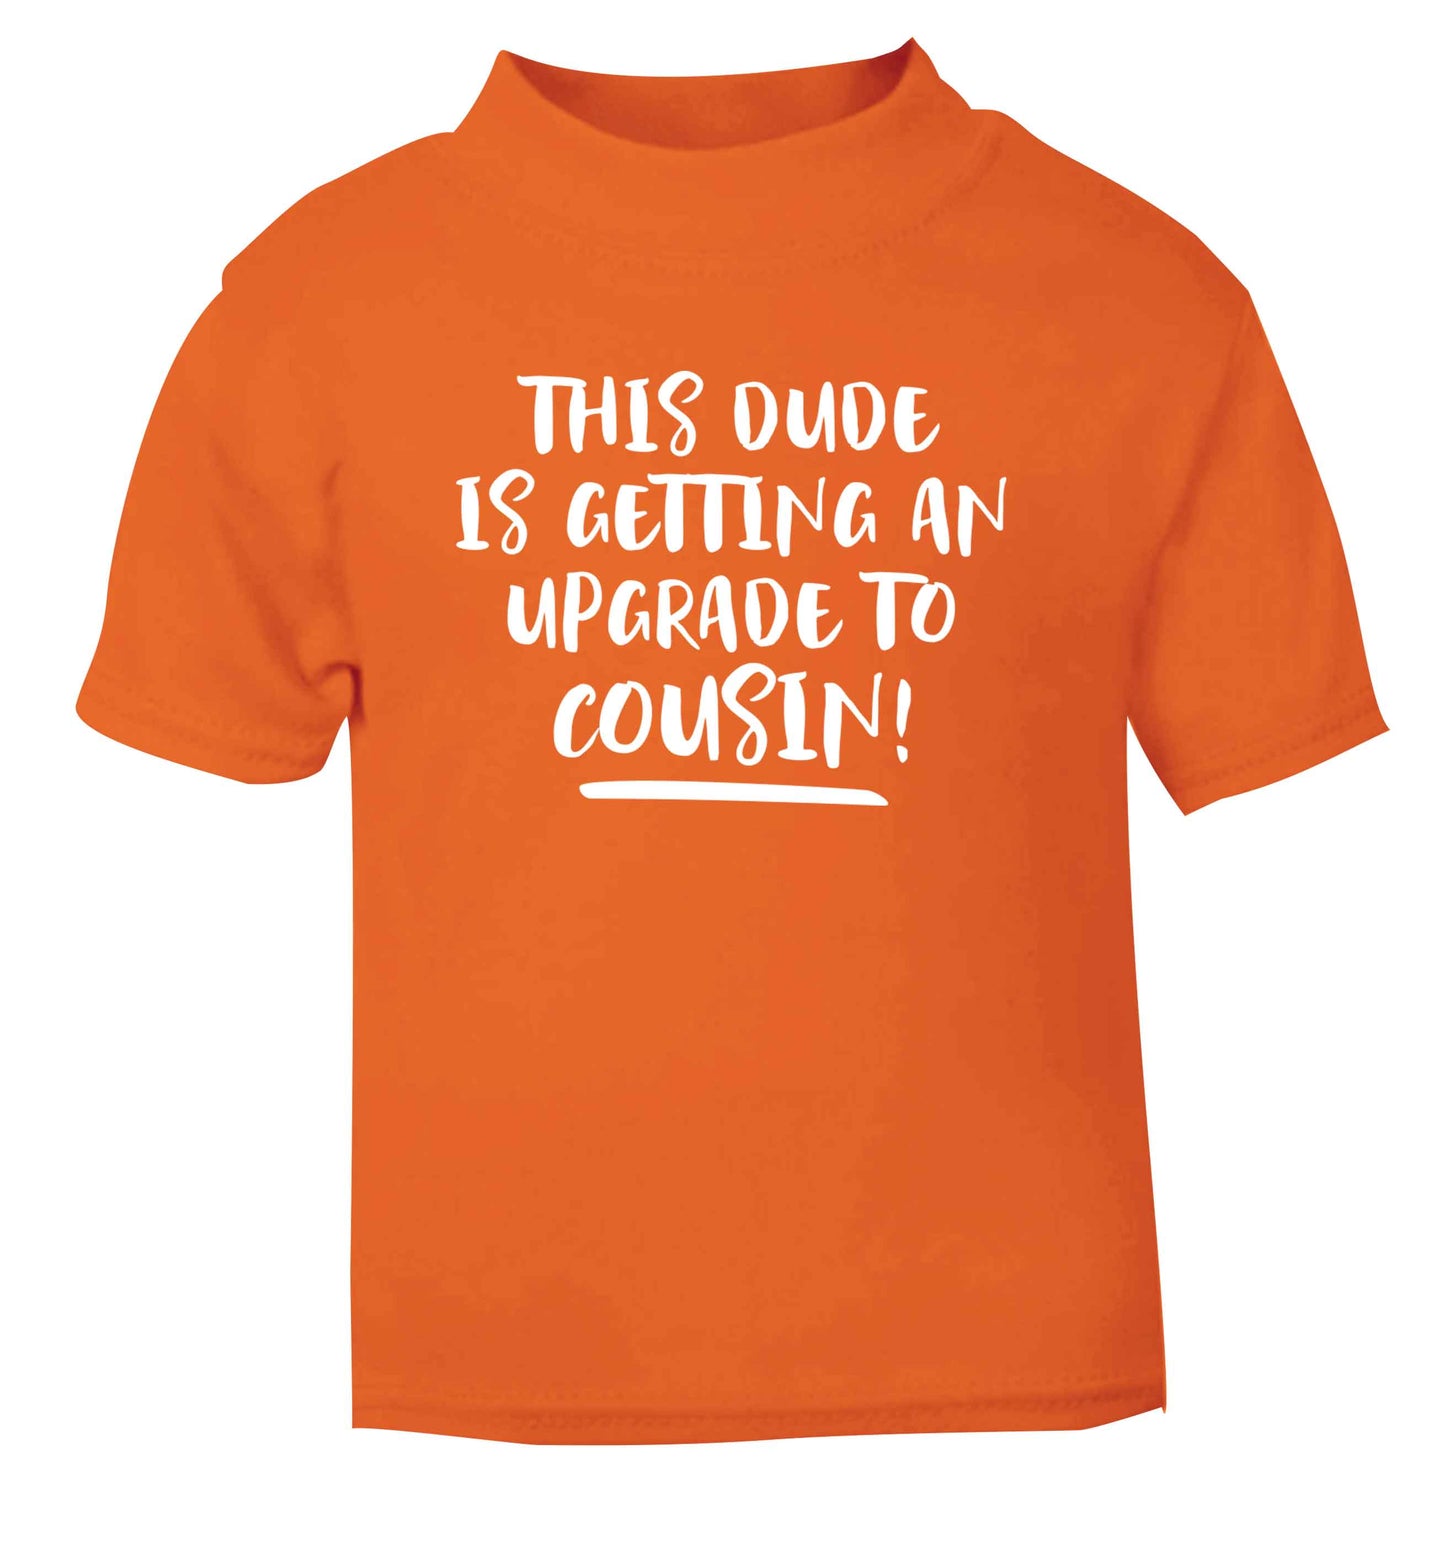 This dude is getting an upgrade to cousin! orange Baby Toddler Tshirt 2 Years